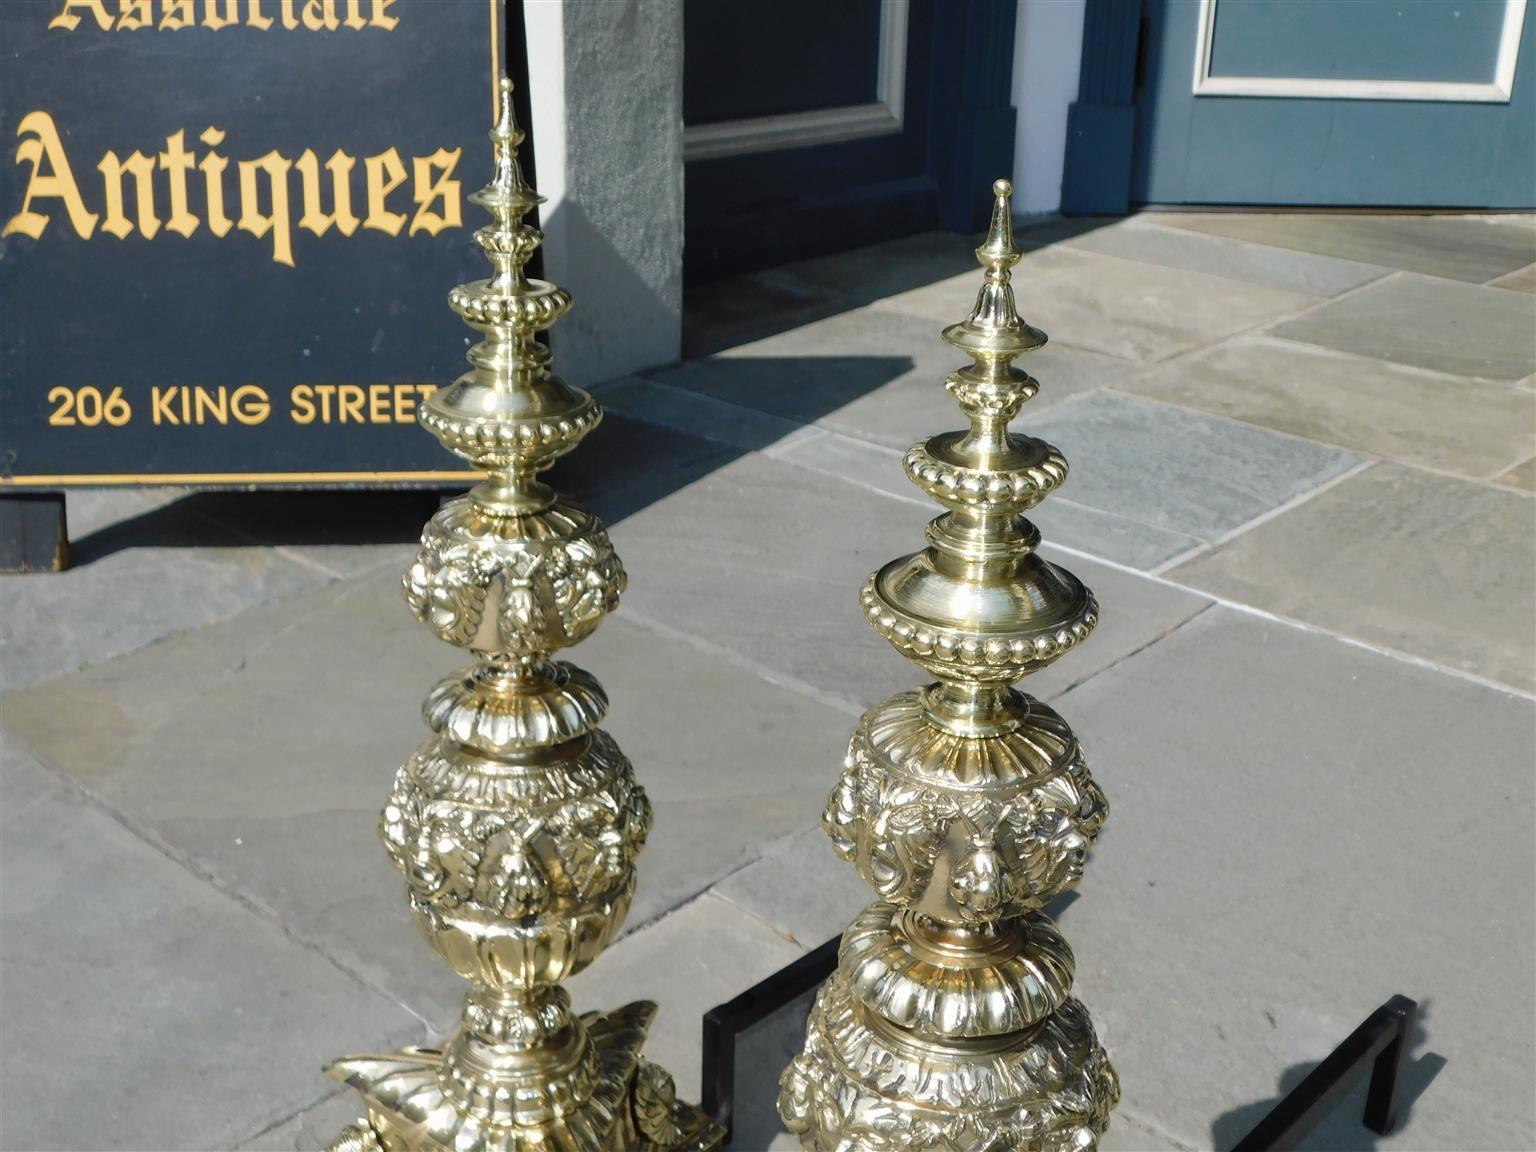 Early 19th Century Pair of Italian Brass Neoclassical Figural Tiered Urn Finial Andirons, C. 1820 For Sale